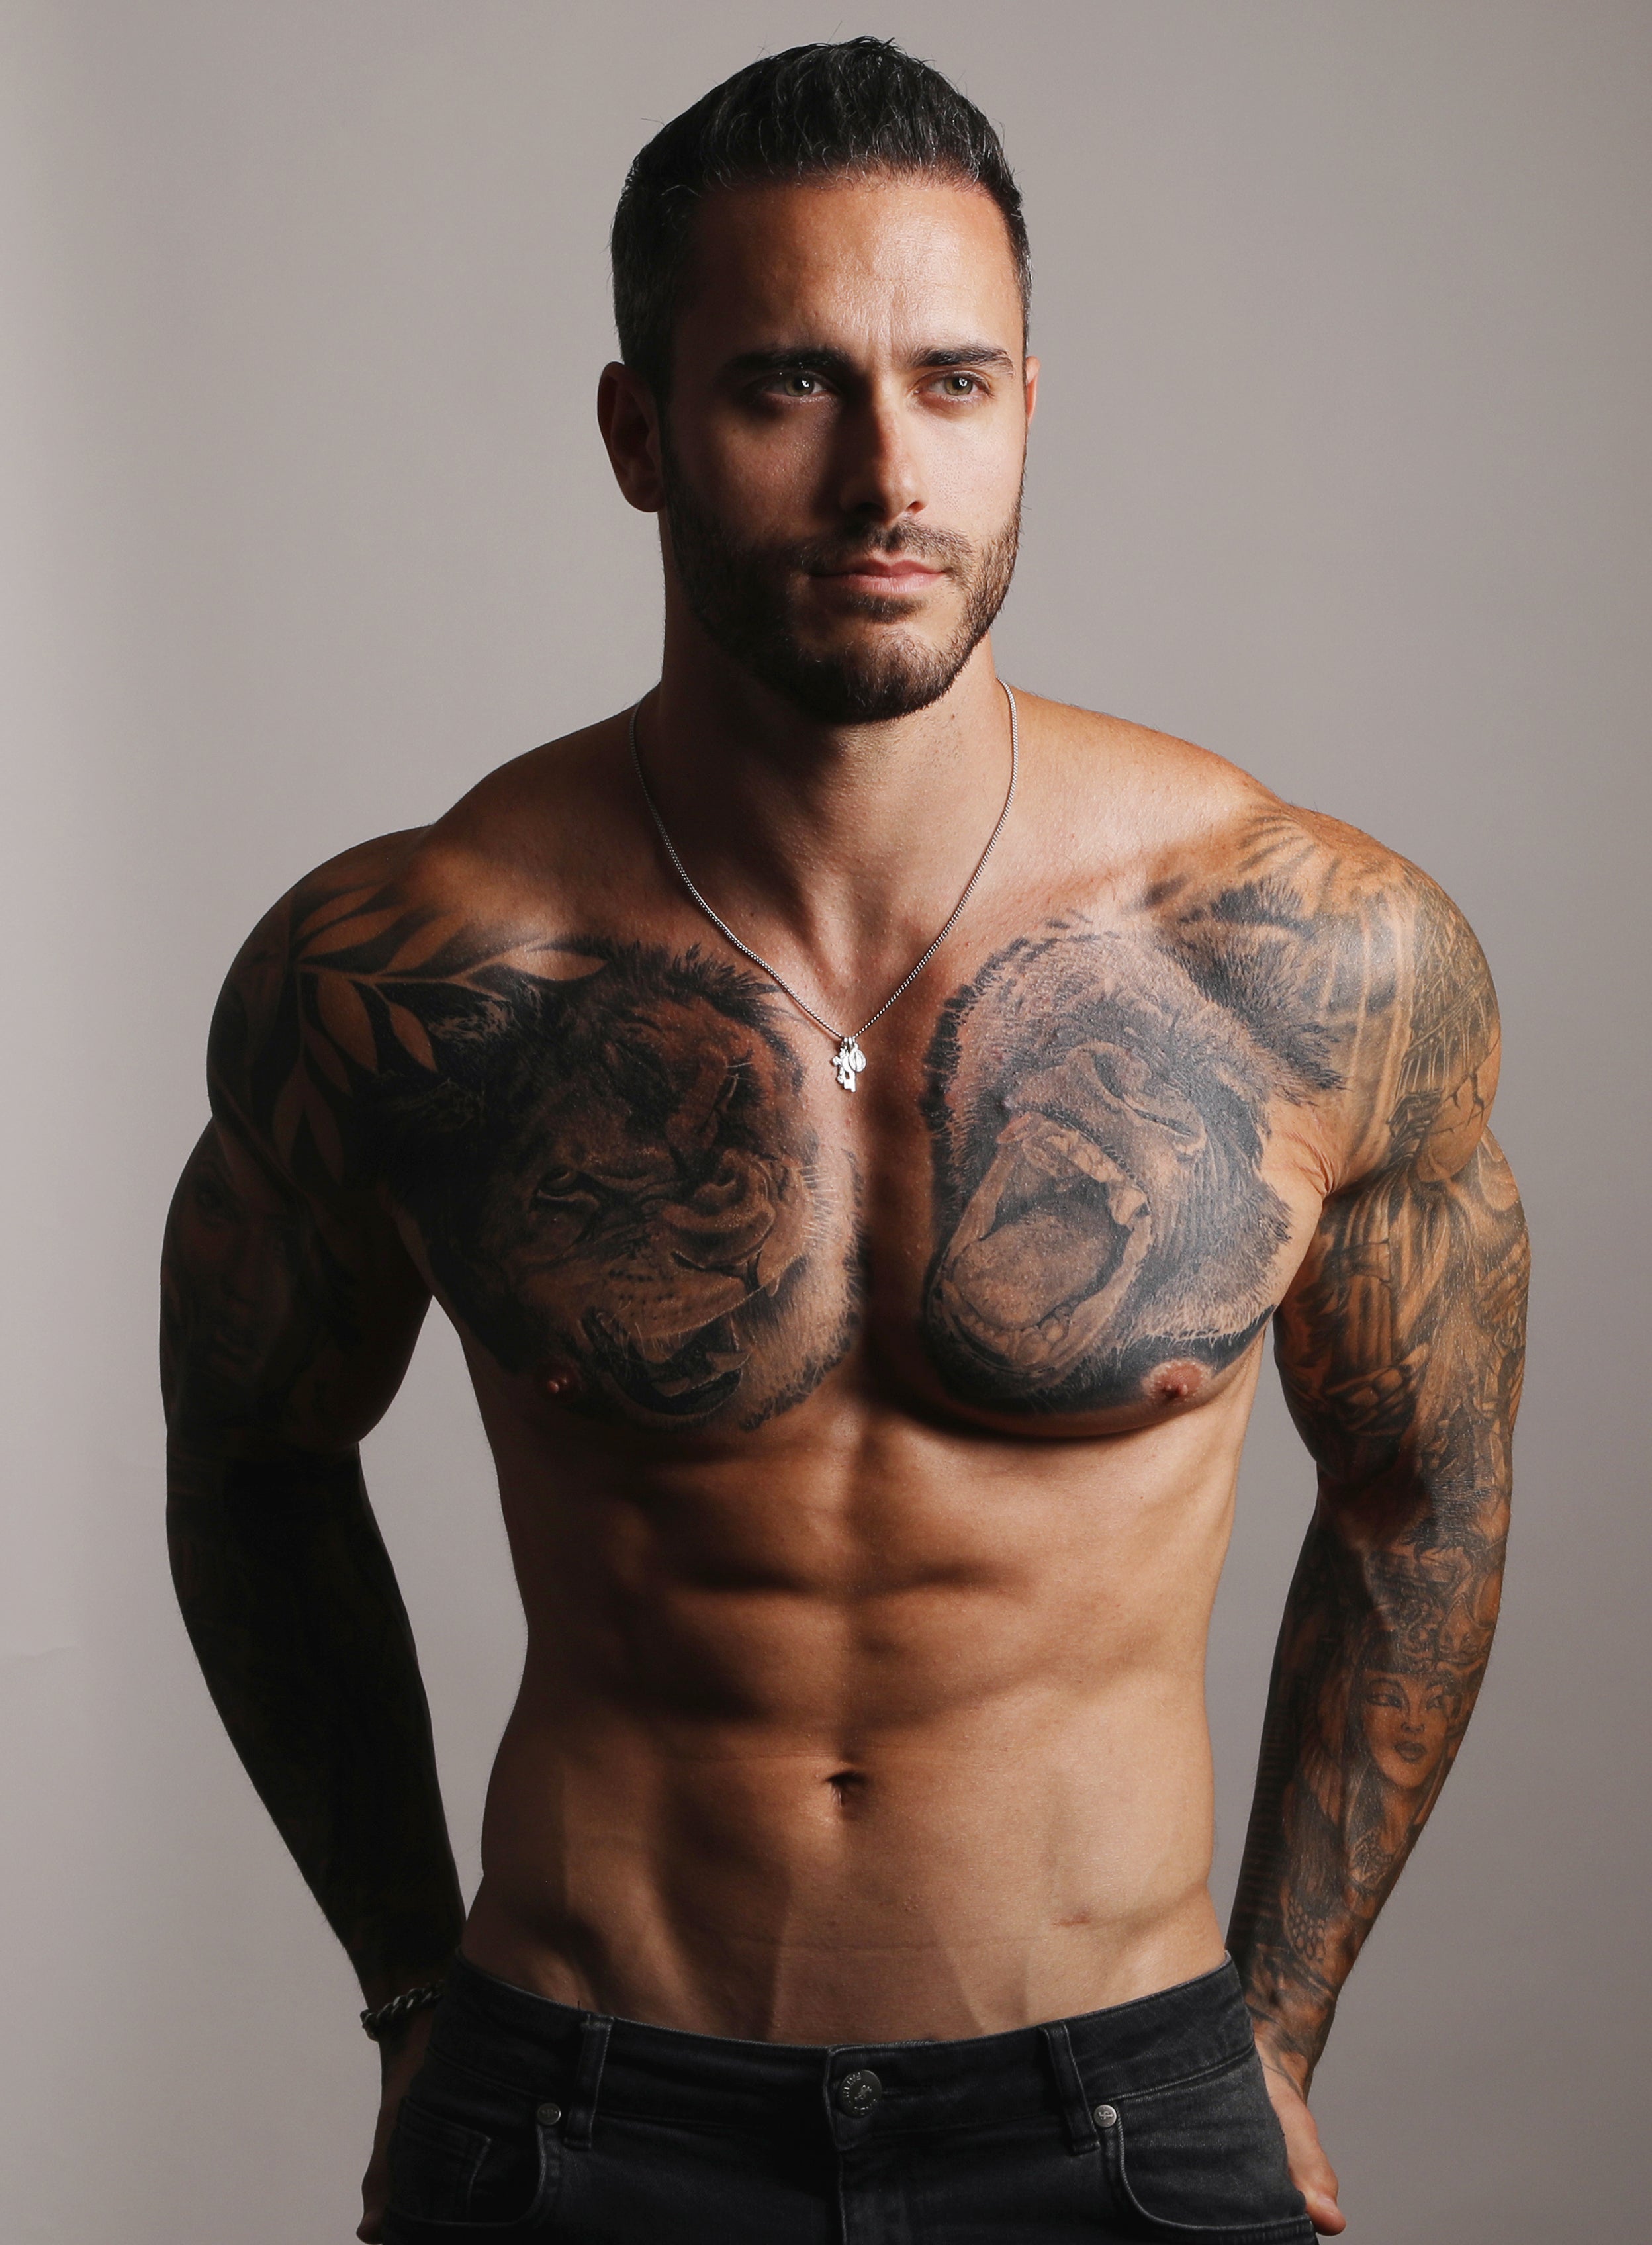 Mike Chabot Photos